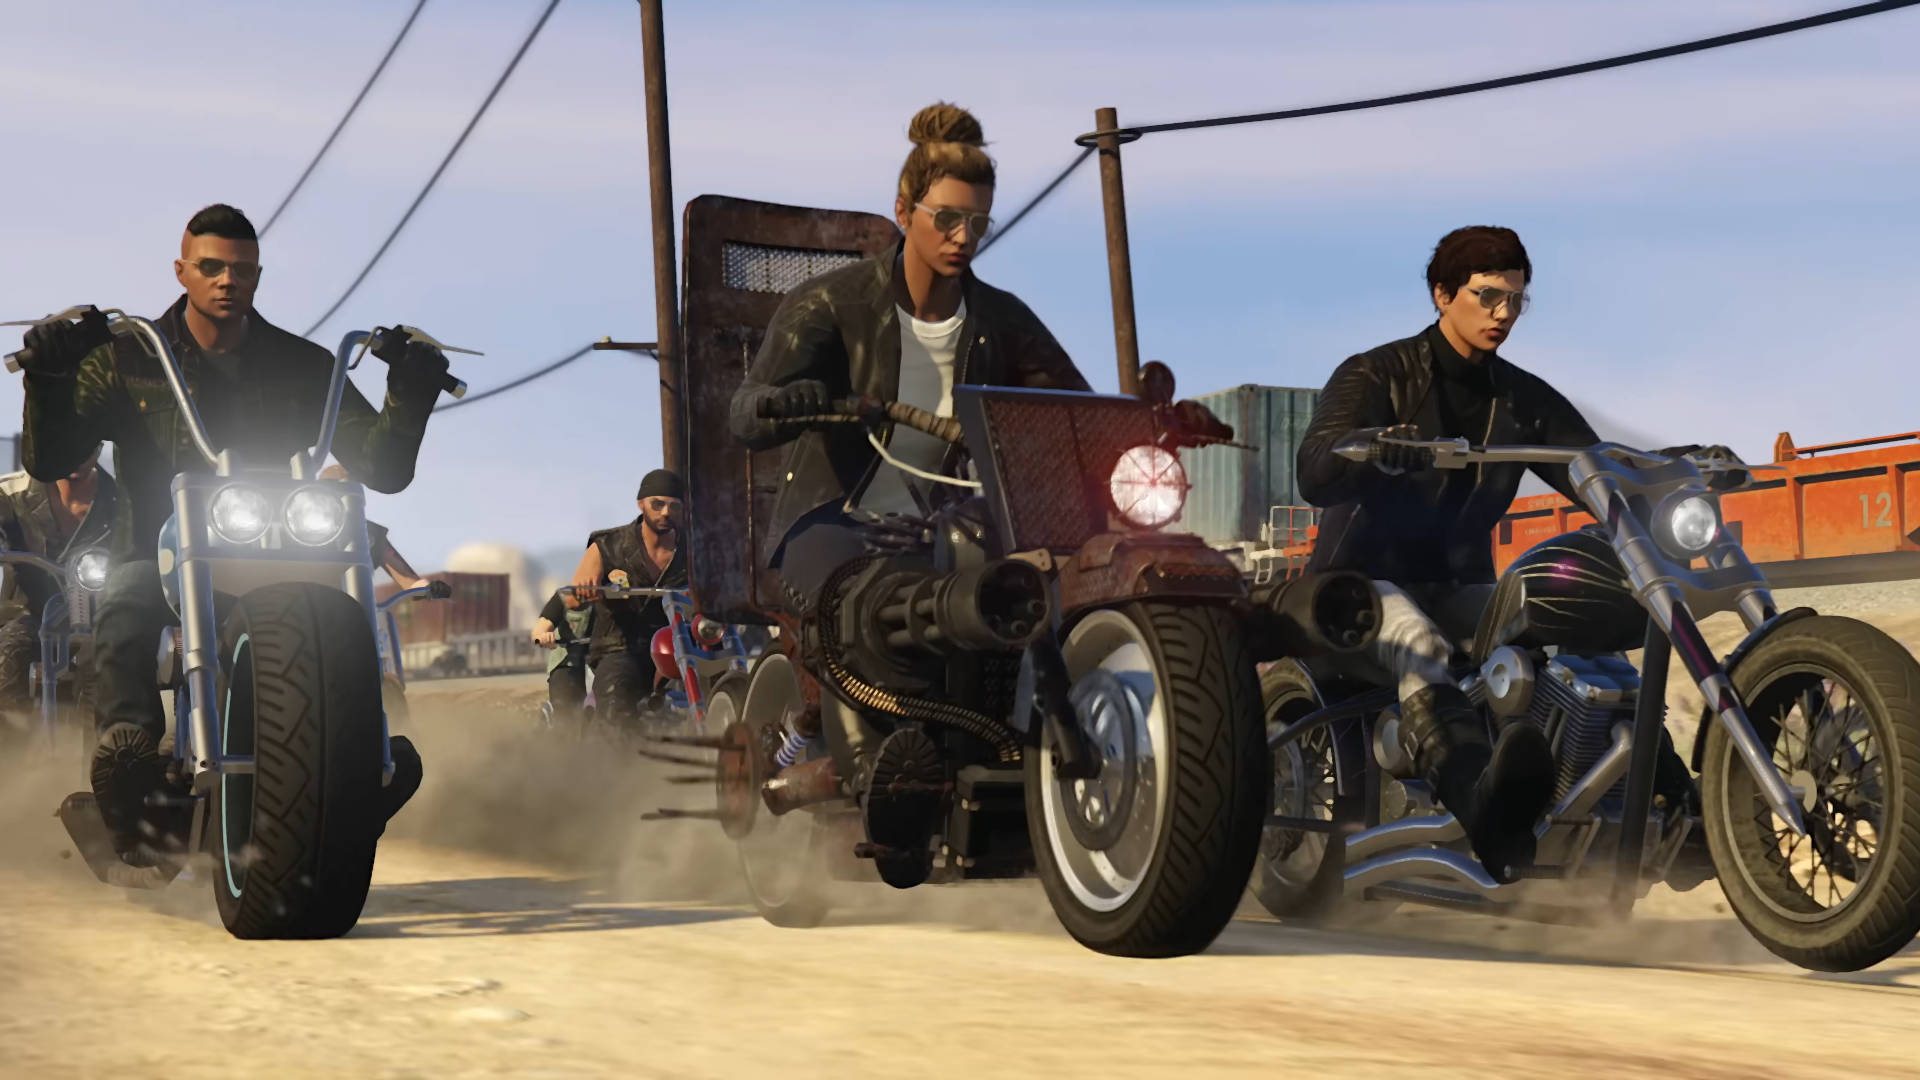 5 of the best car mods for GTA 5 RP, ranked